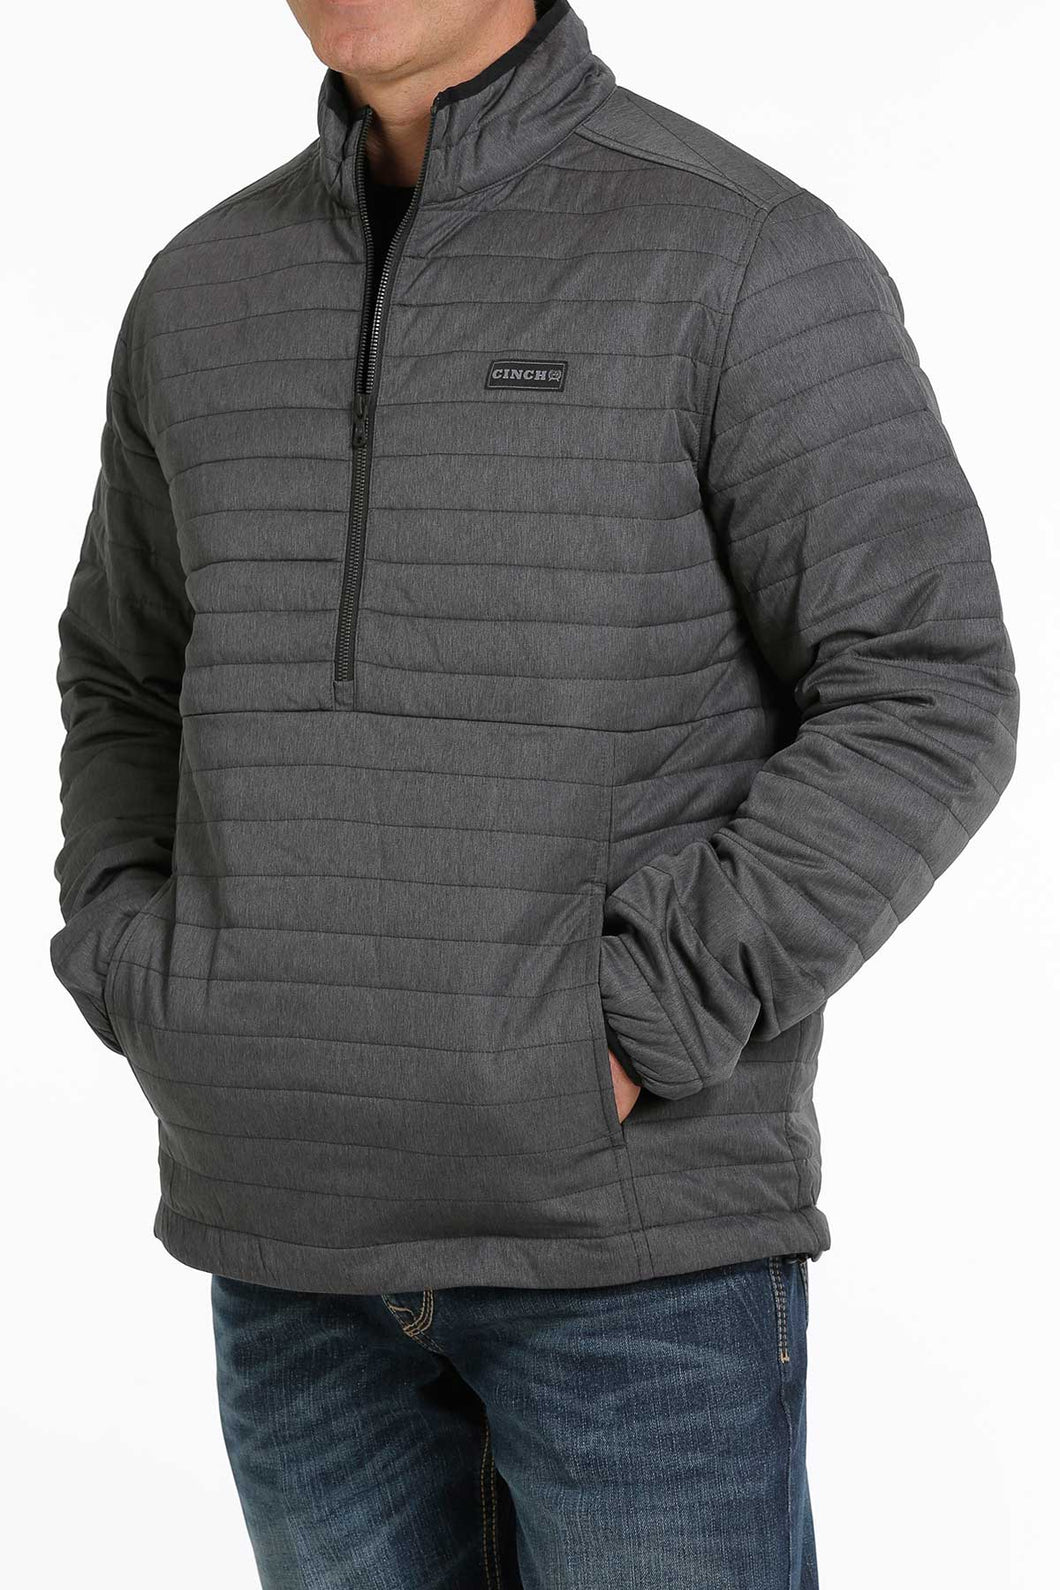 MEN'S 1/2 ZIP QUILTED PULLOVER - CHARCOAL